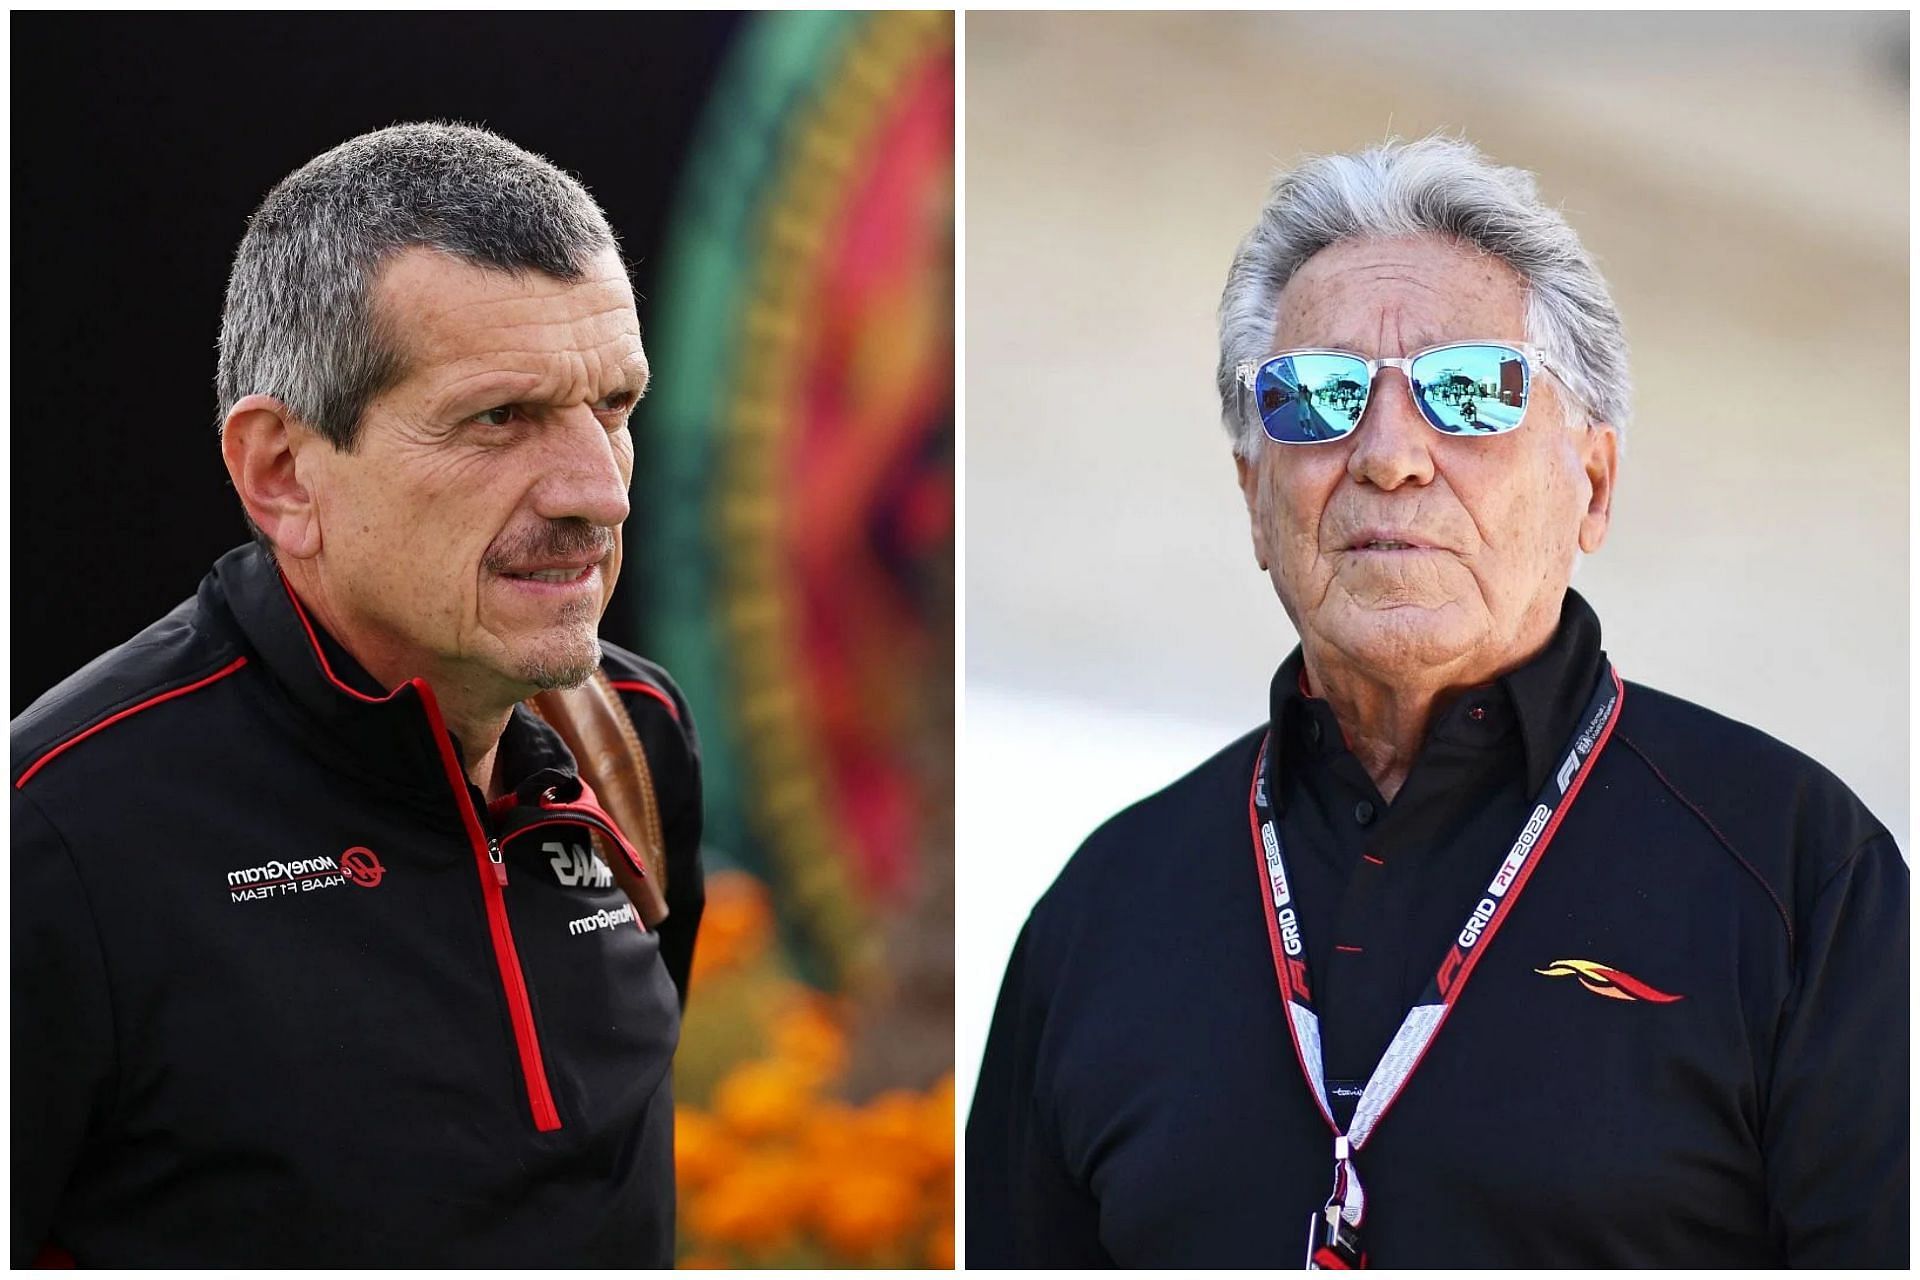 Guenther Steiner (L) and Mario Andretti (R) (Collage via Sportskeeda)